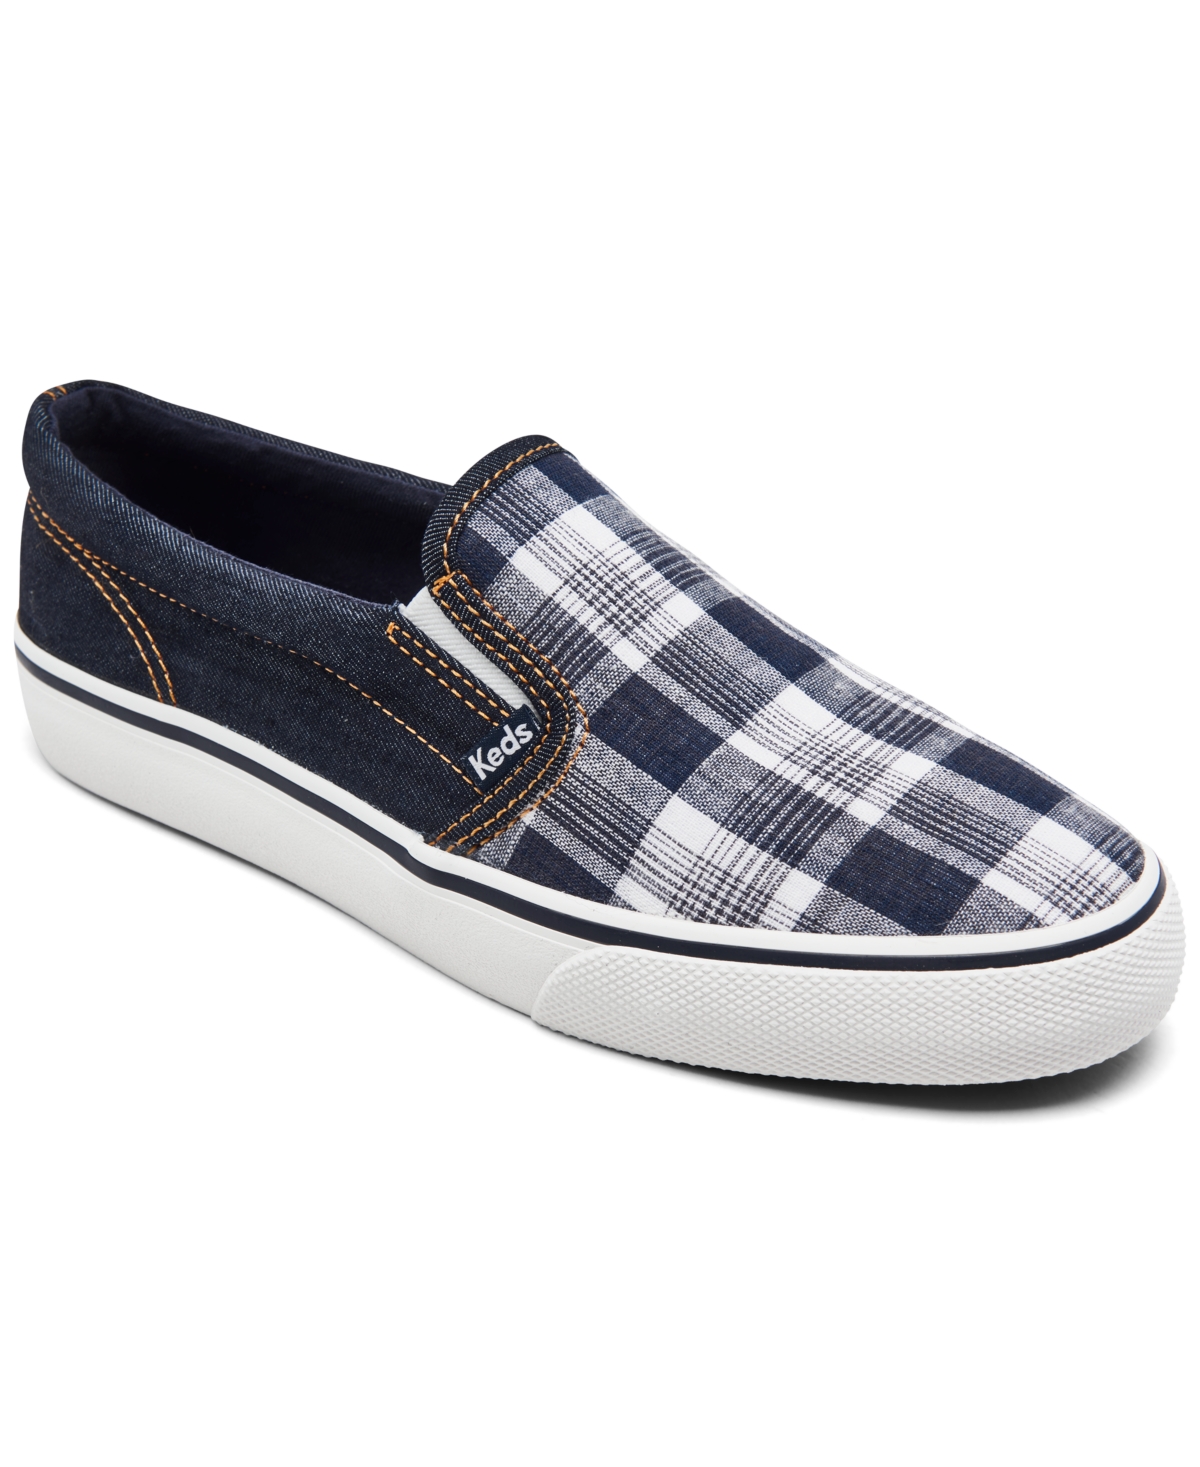 UPC 195018114730 product image for Keds Women's Jump Kick Slip-On Canvas Casual Sneakers from Finish Line | upcitemdb.com